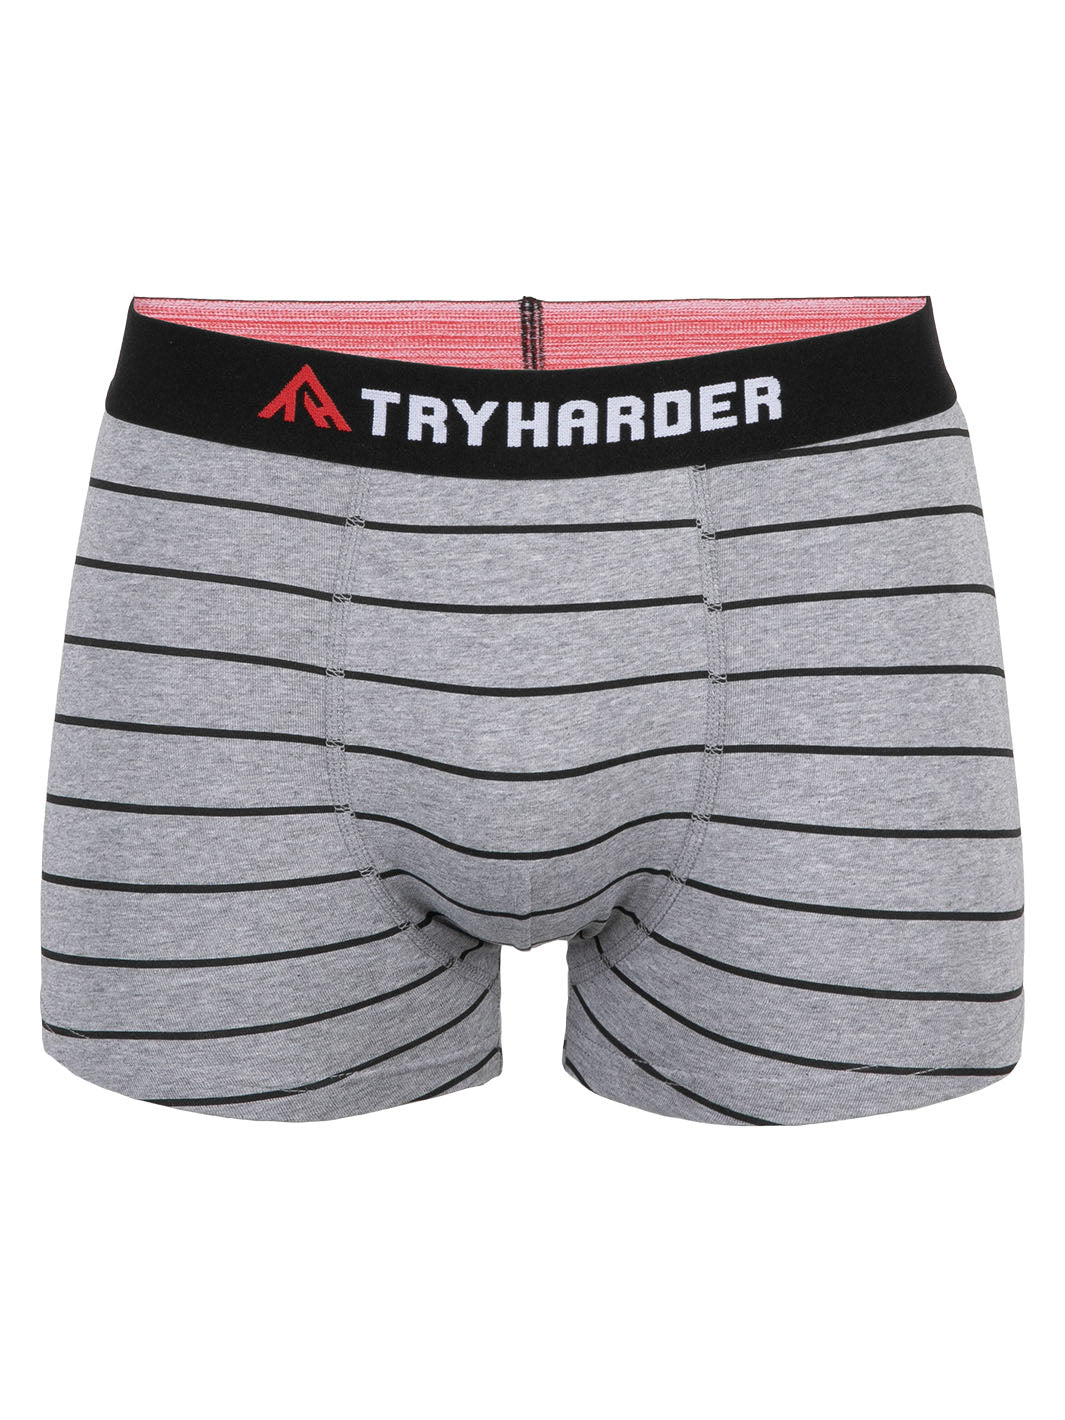 TRYHARDER - Boxer - Grey 2 pack